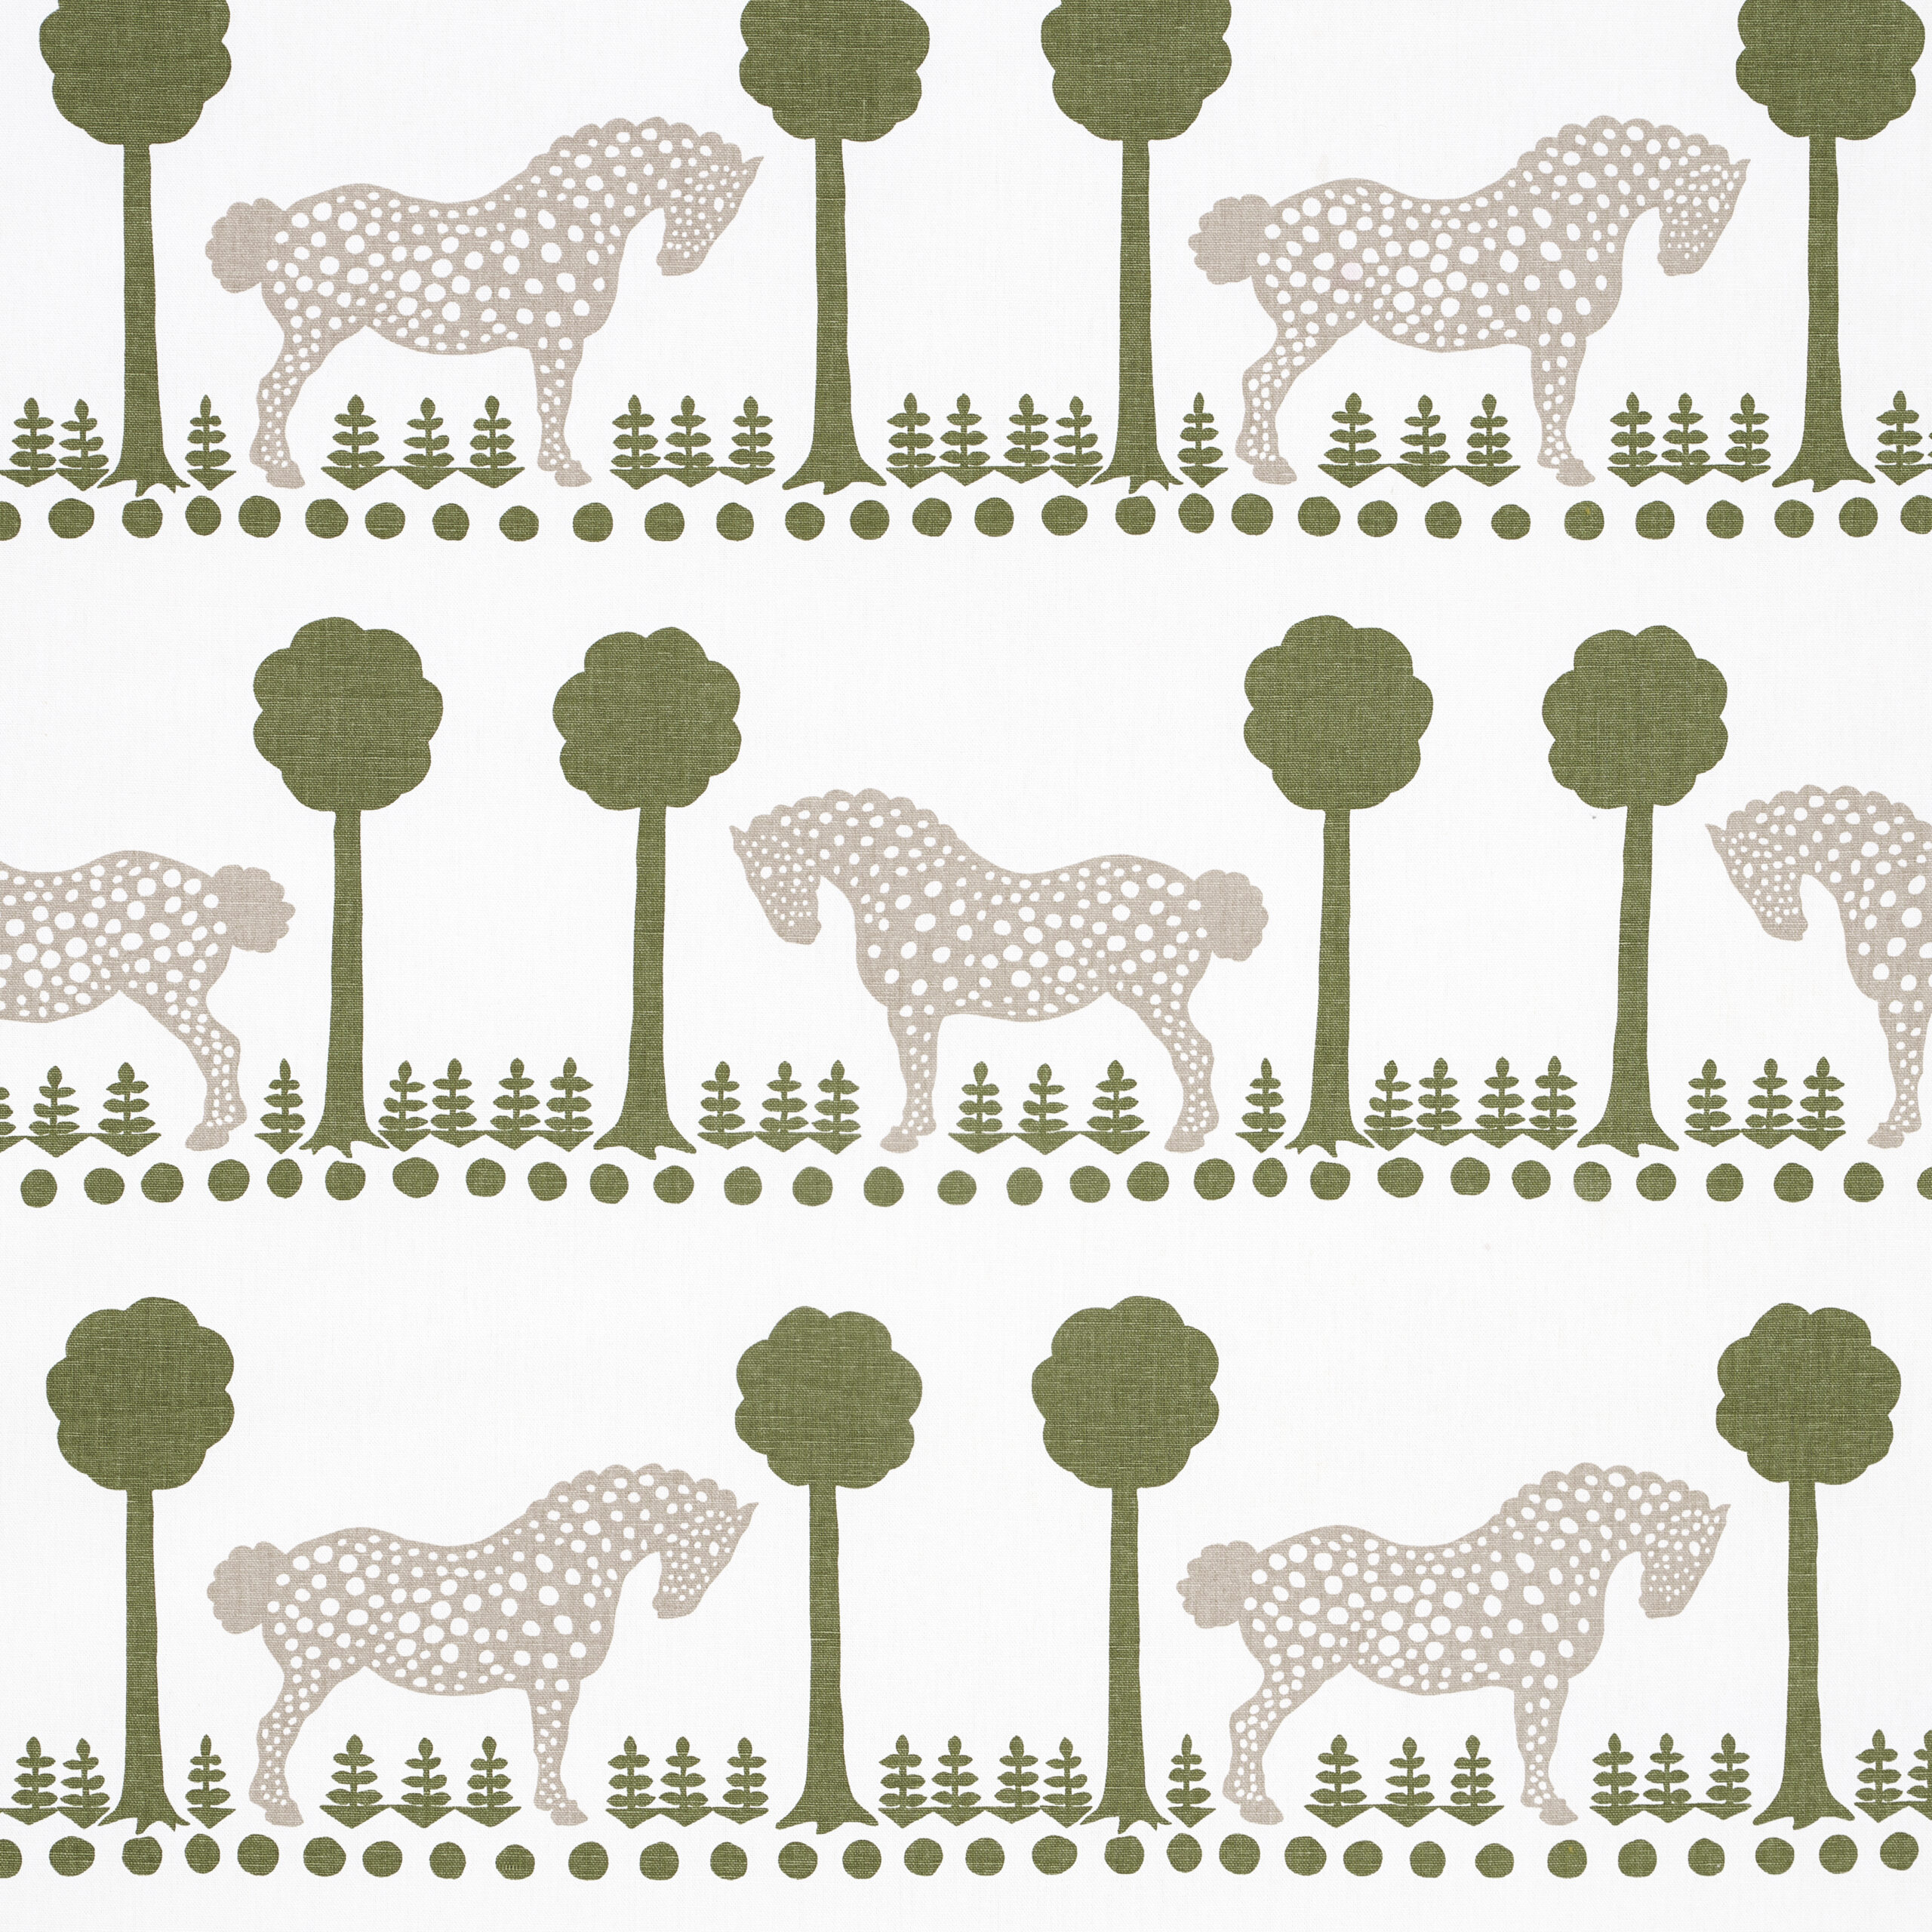 Schumacher Polka Dot Pony Fabric in Olive, from the Folly Cove collection